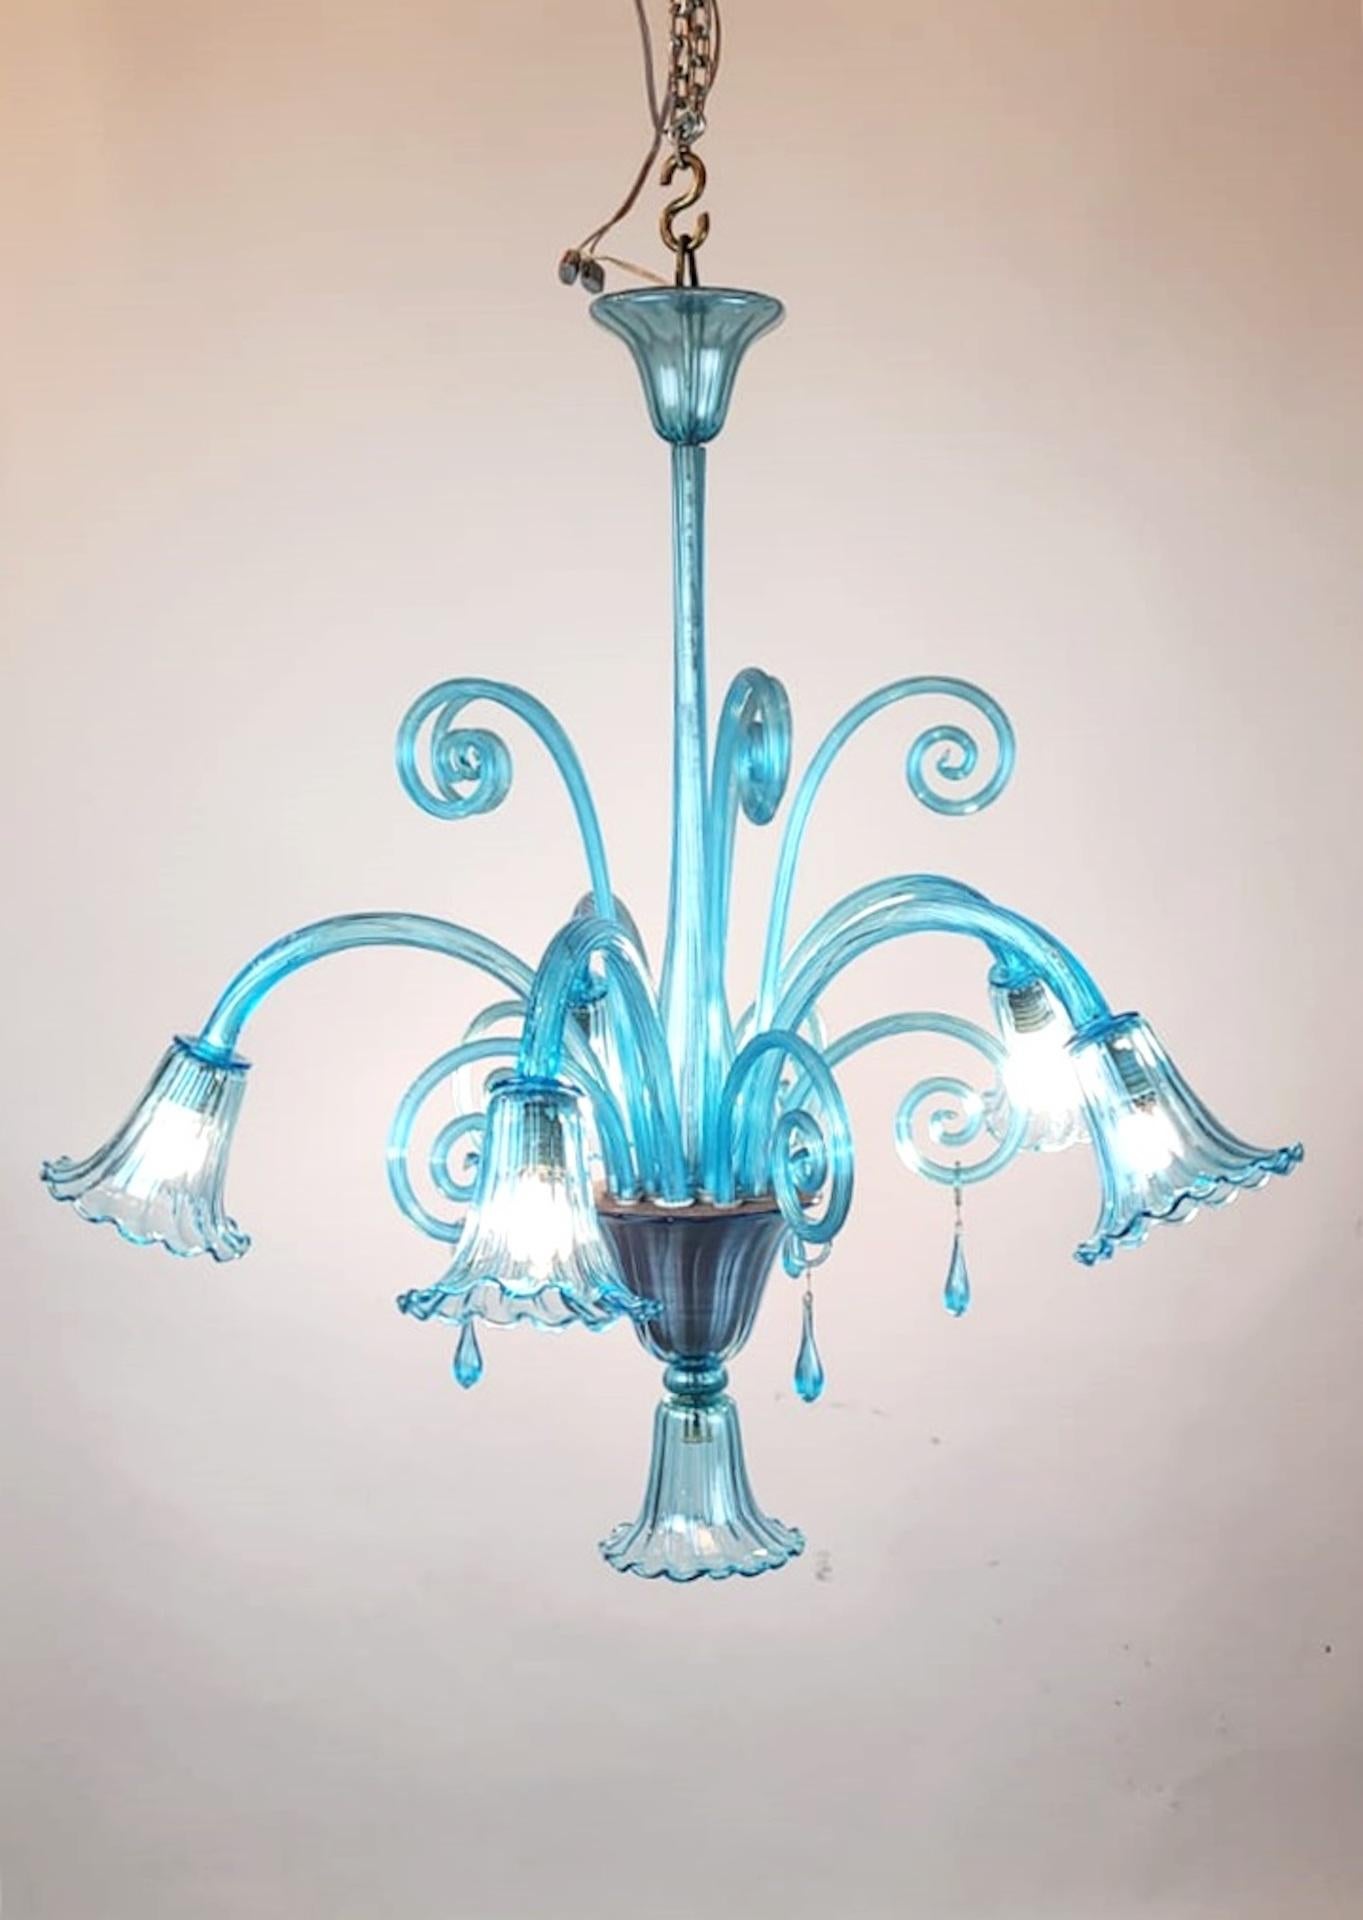 Murano Blue Glass Chandelier - 5 Arms Of Light, 1940s For Sale 1